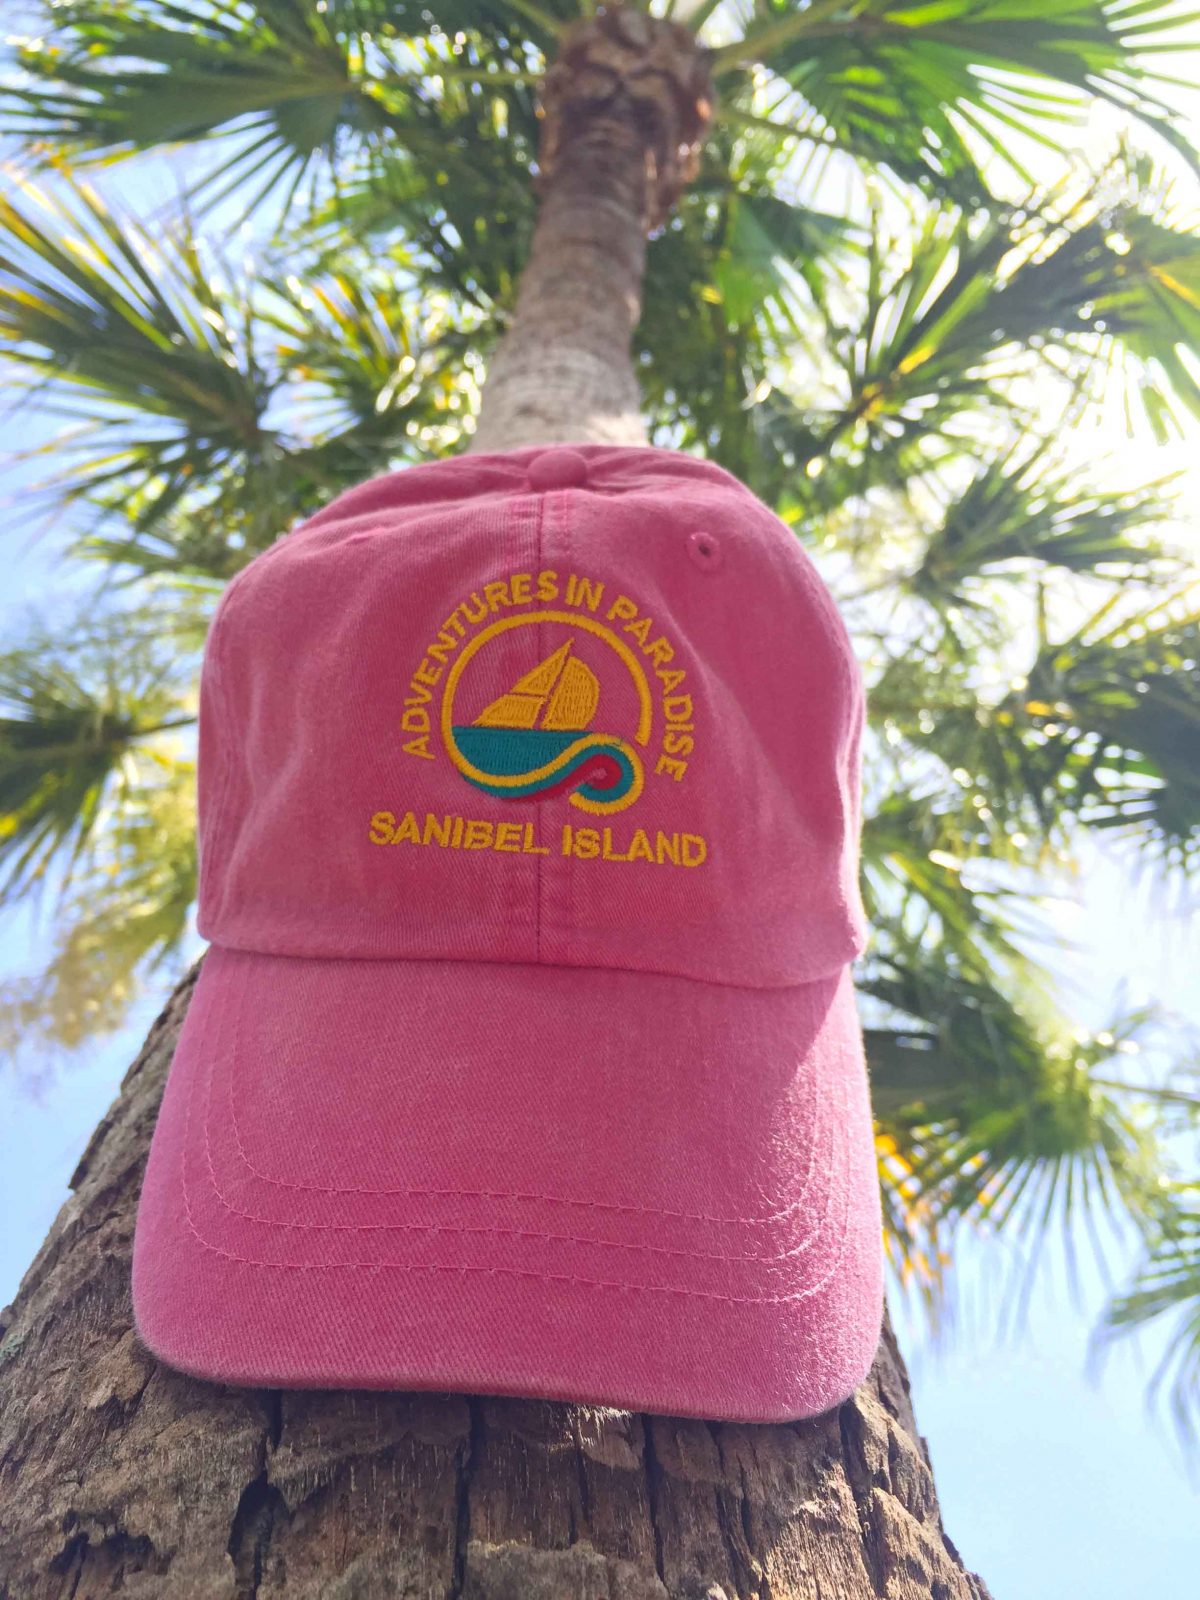 The Sanibel hat | Adventures in Paradise - Outfitters to the Outsiders